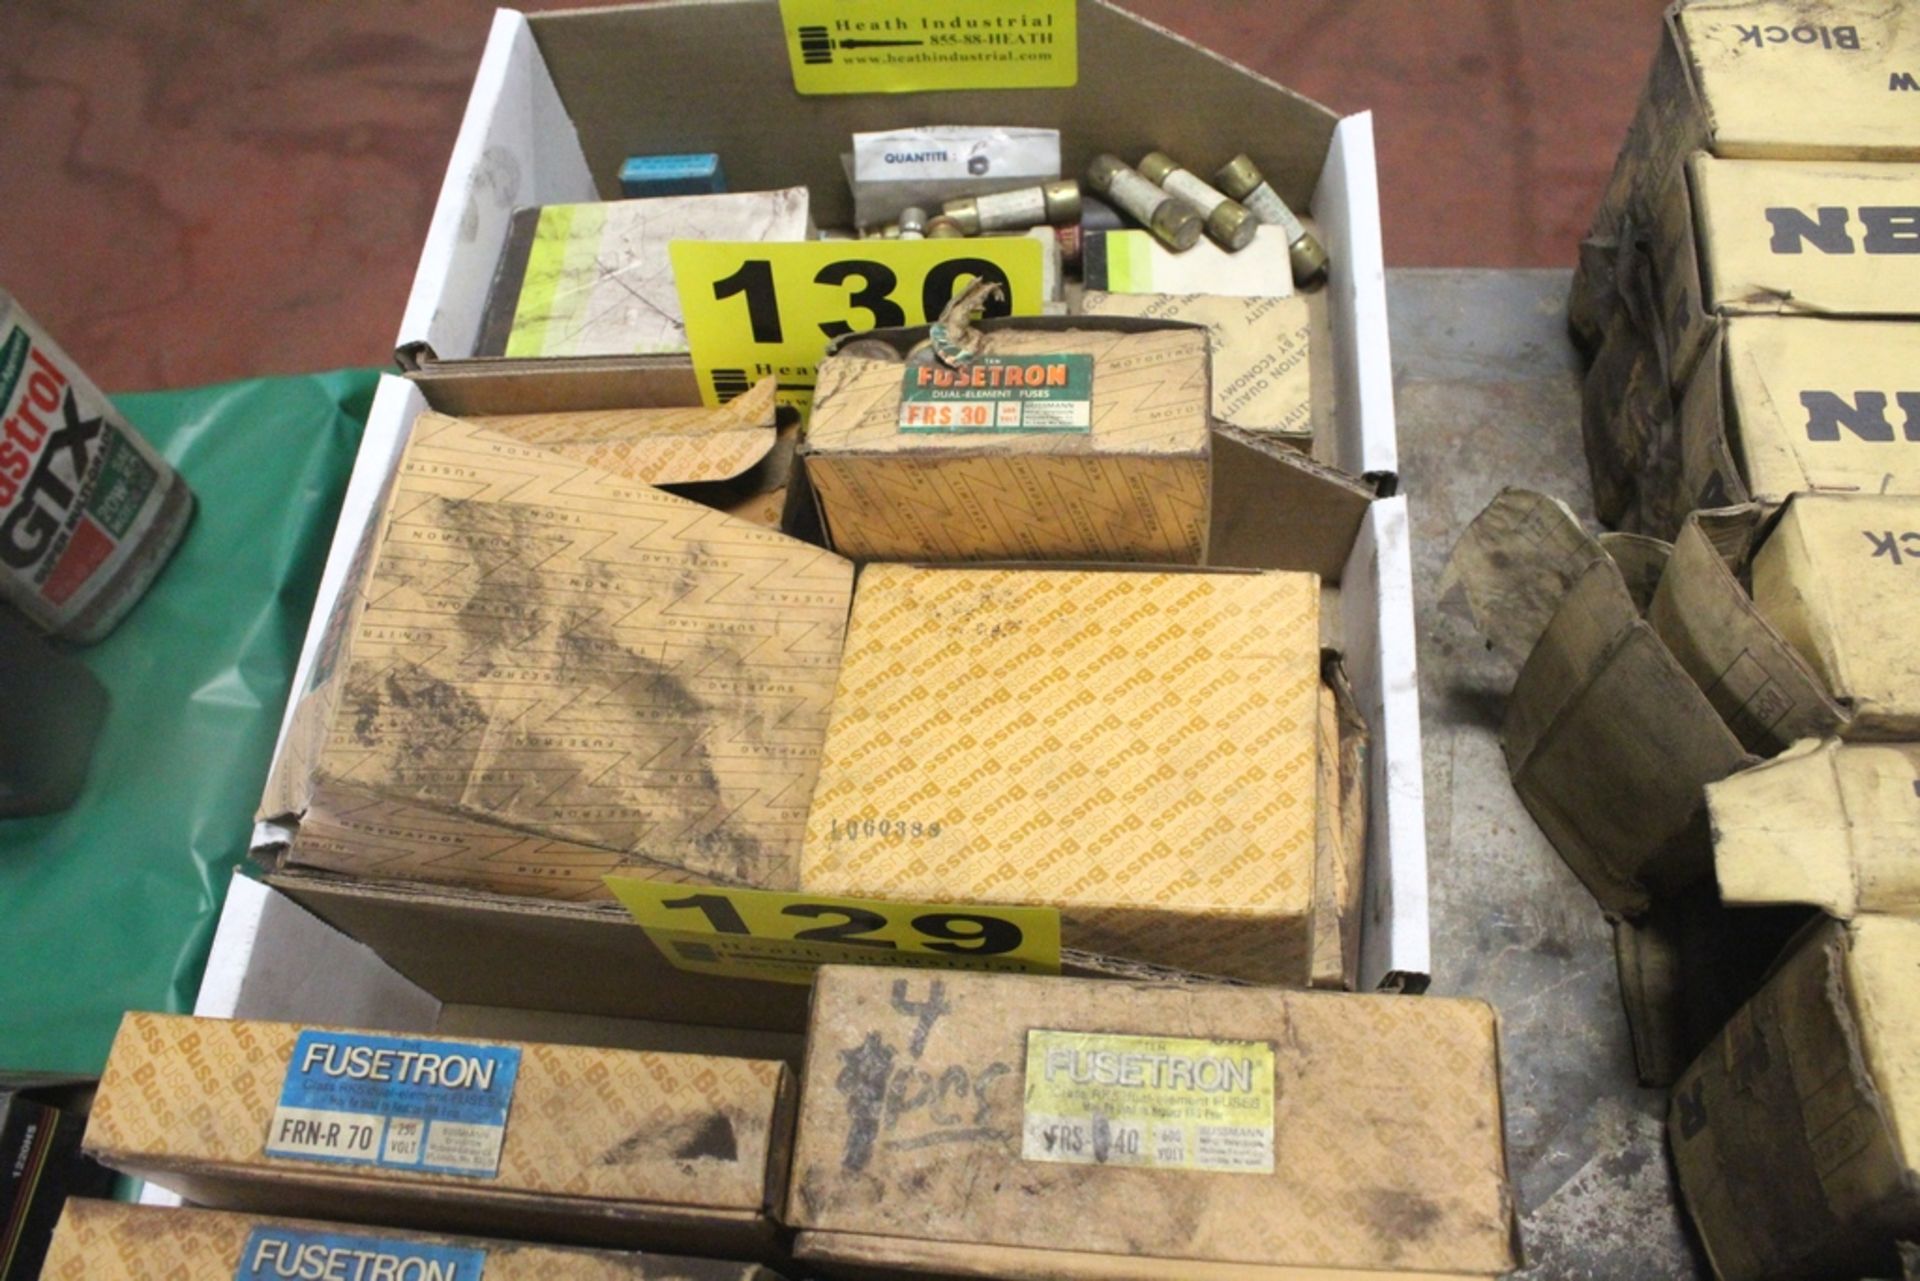 BOXES OF FUSETRON FUSES CONTAINING FRS 12, FRS-R 17, AND FRS 30